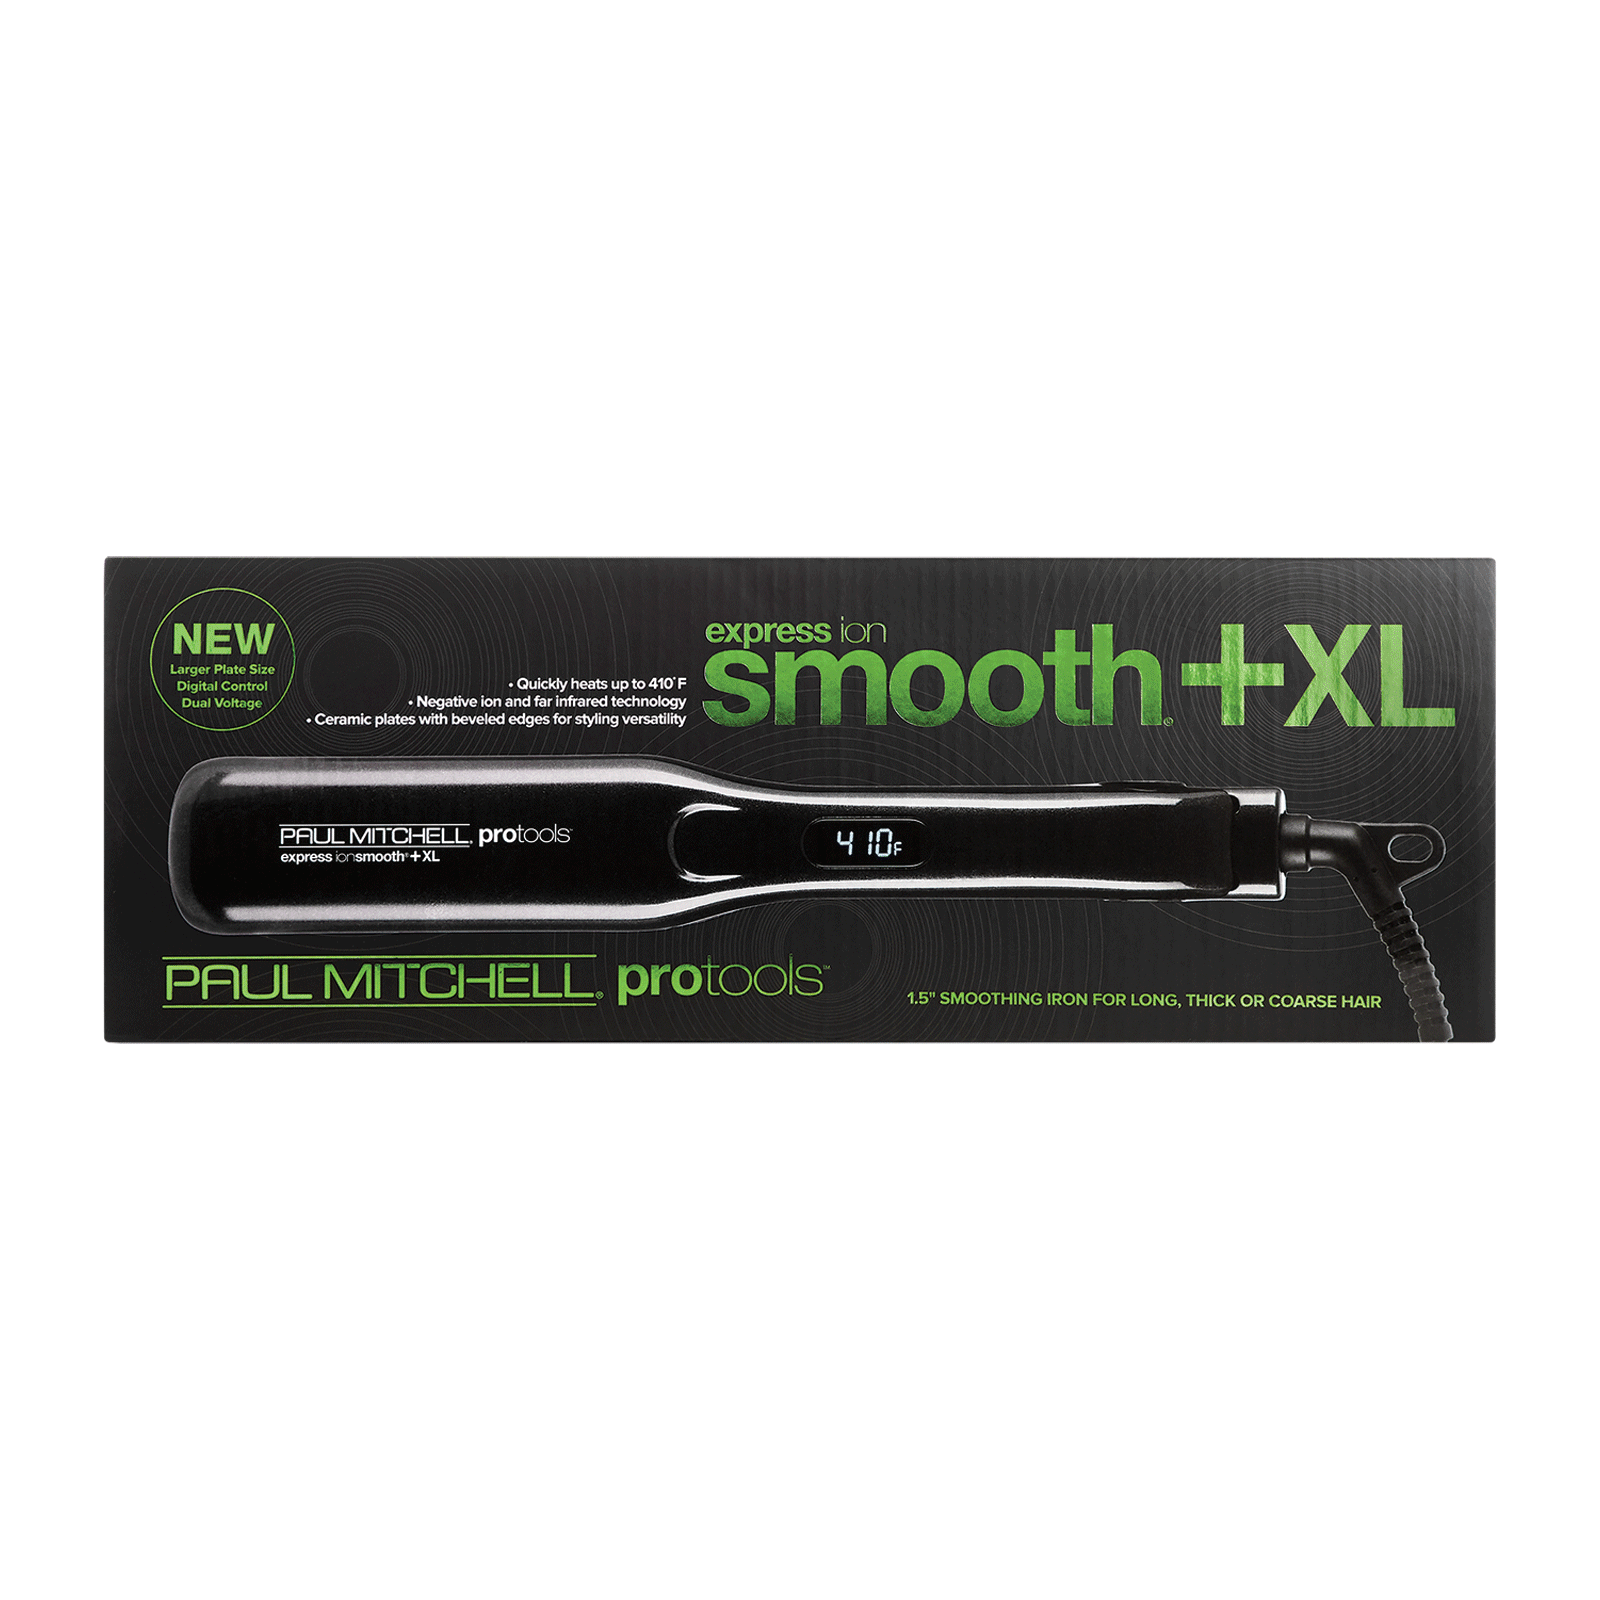 Paul Mitchell Express Ion Smooth   XL Styling Iron 1.5